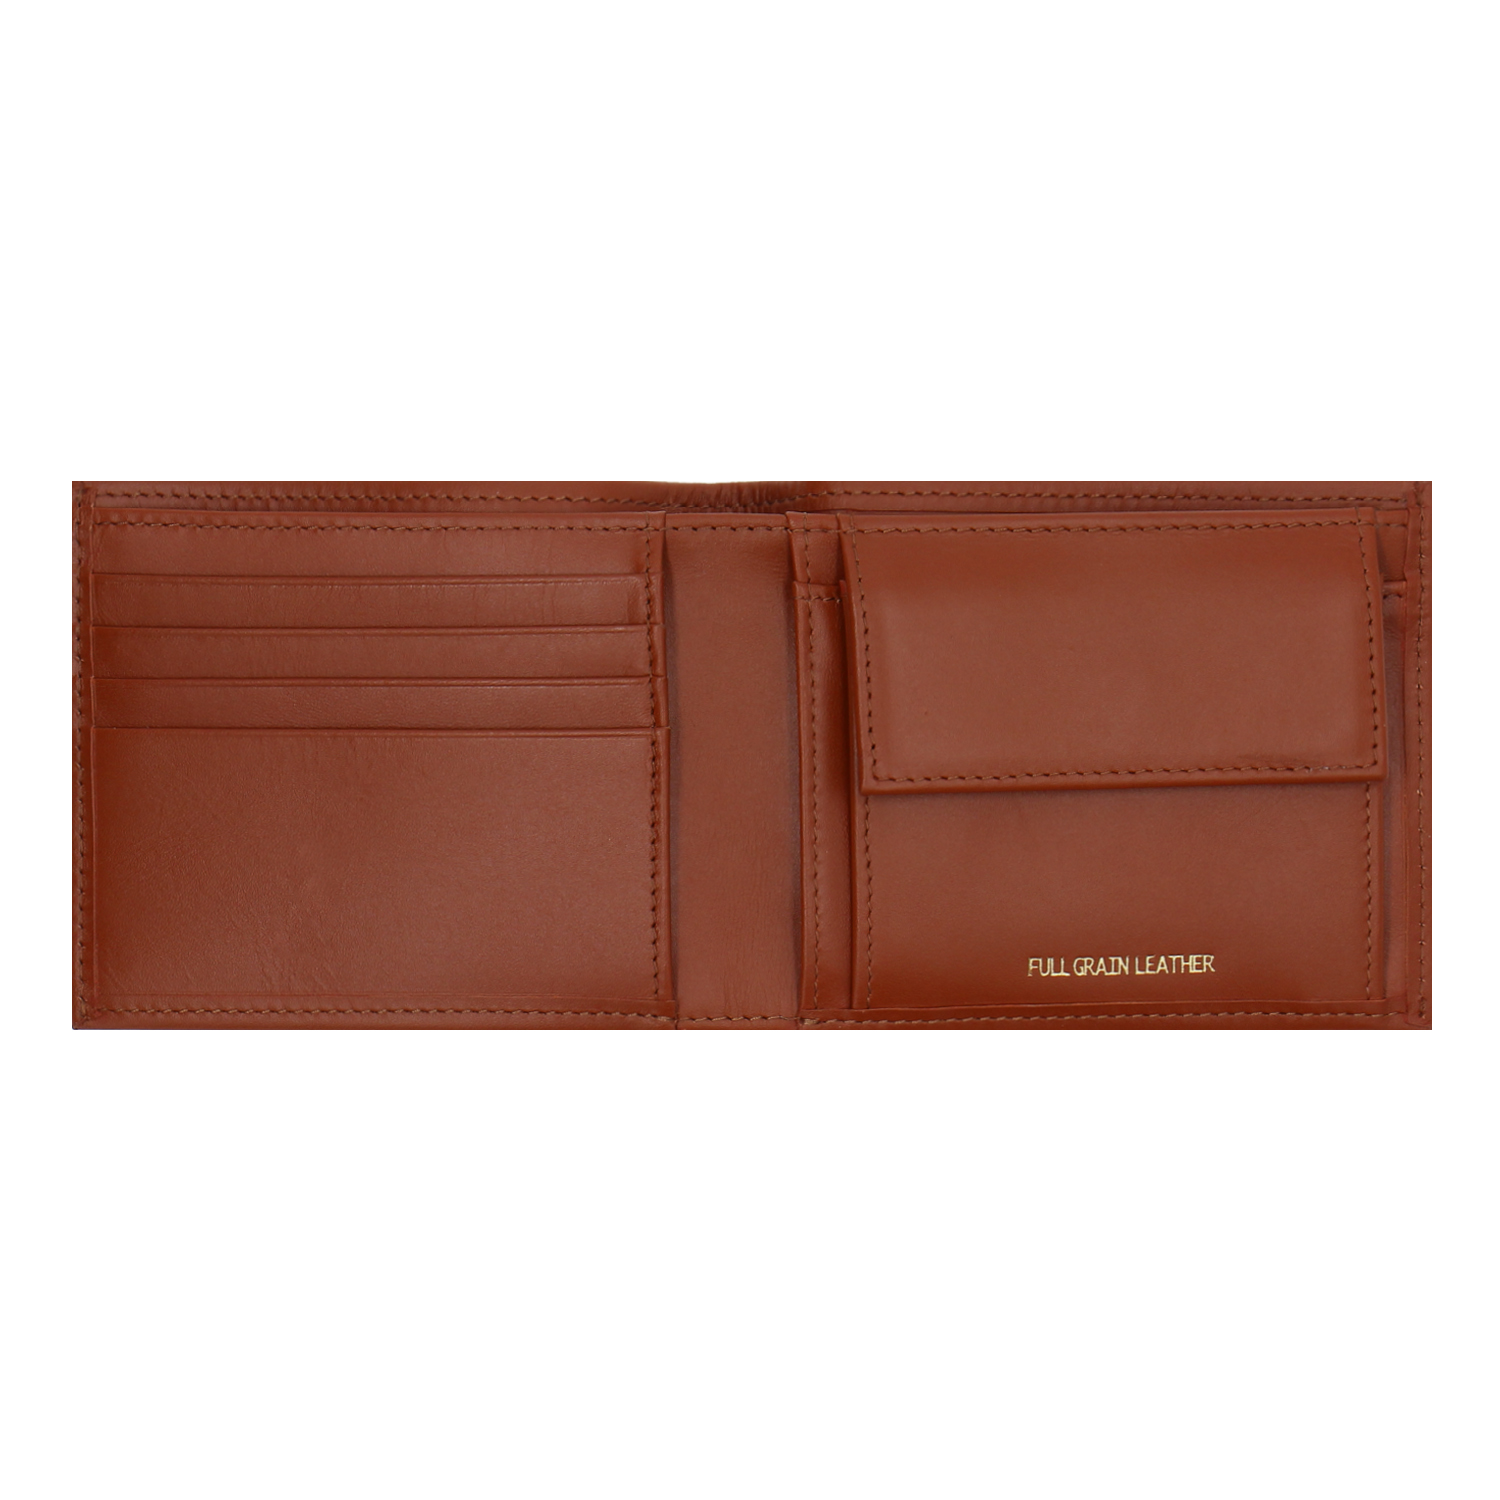 CROSSING WALLETS - Full Grain Leather, RFID Protected, 2 Year Guarantee